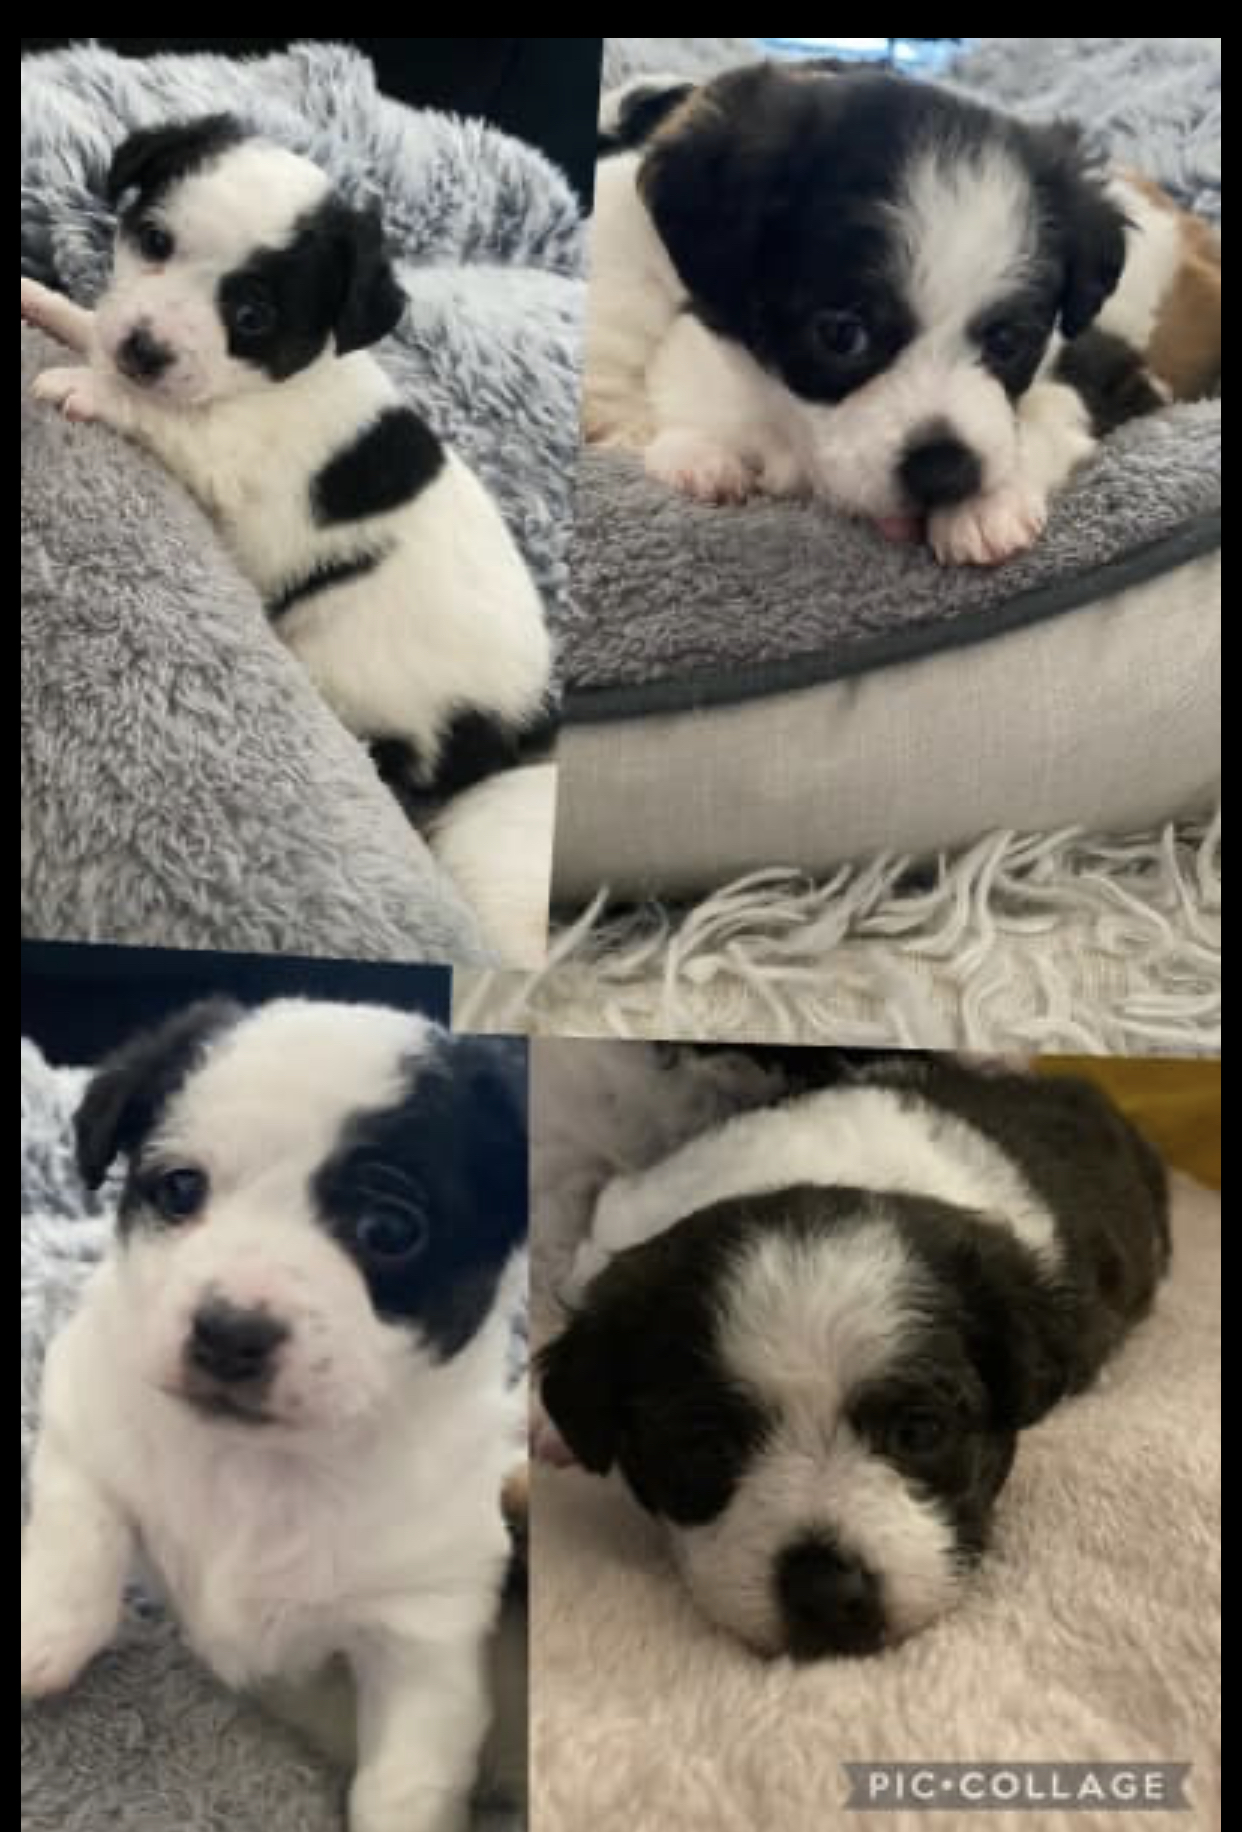 Jackapoo Puppies for Sale